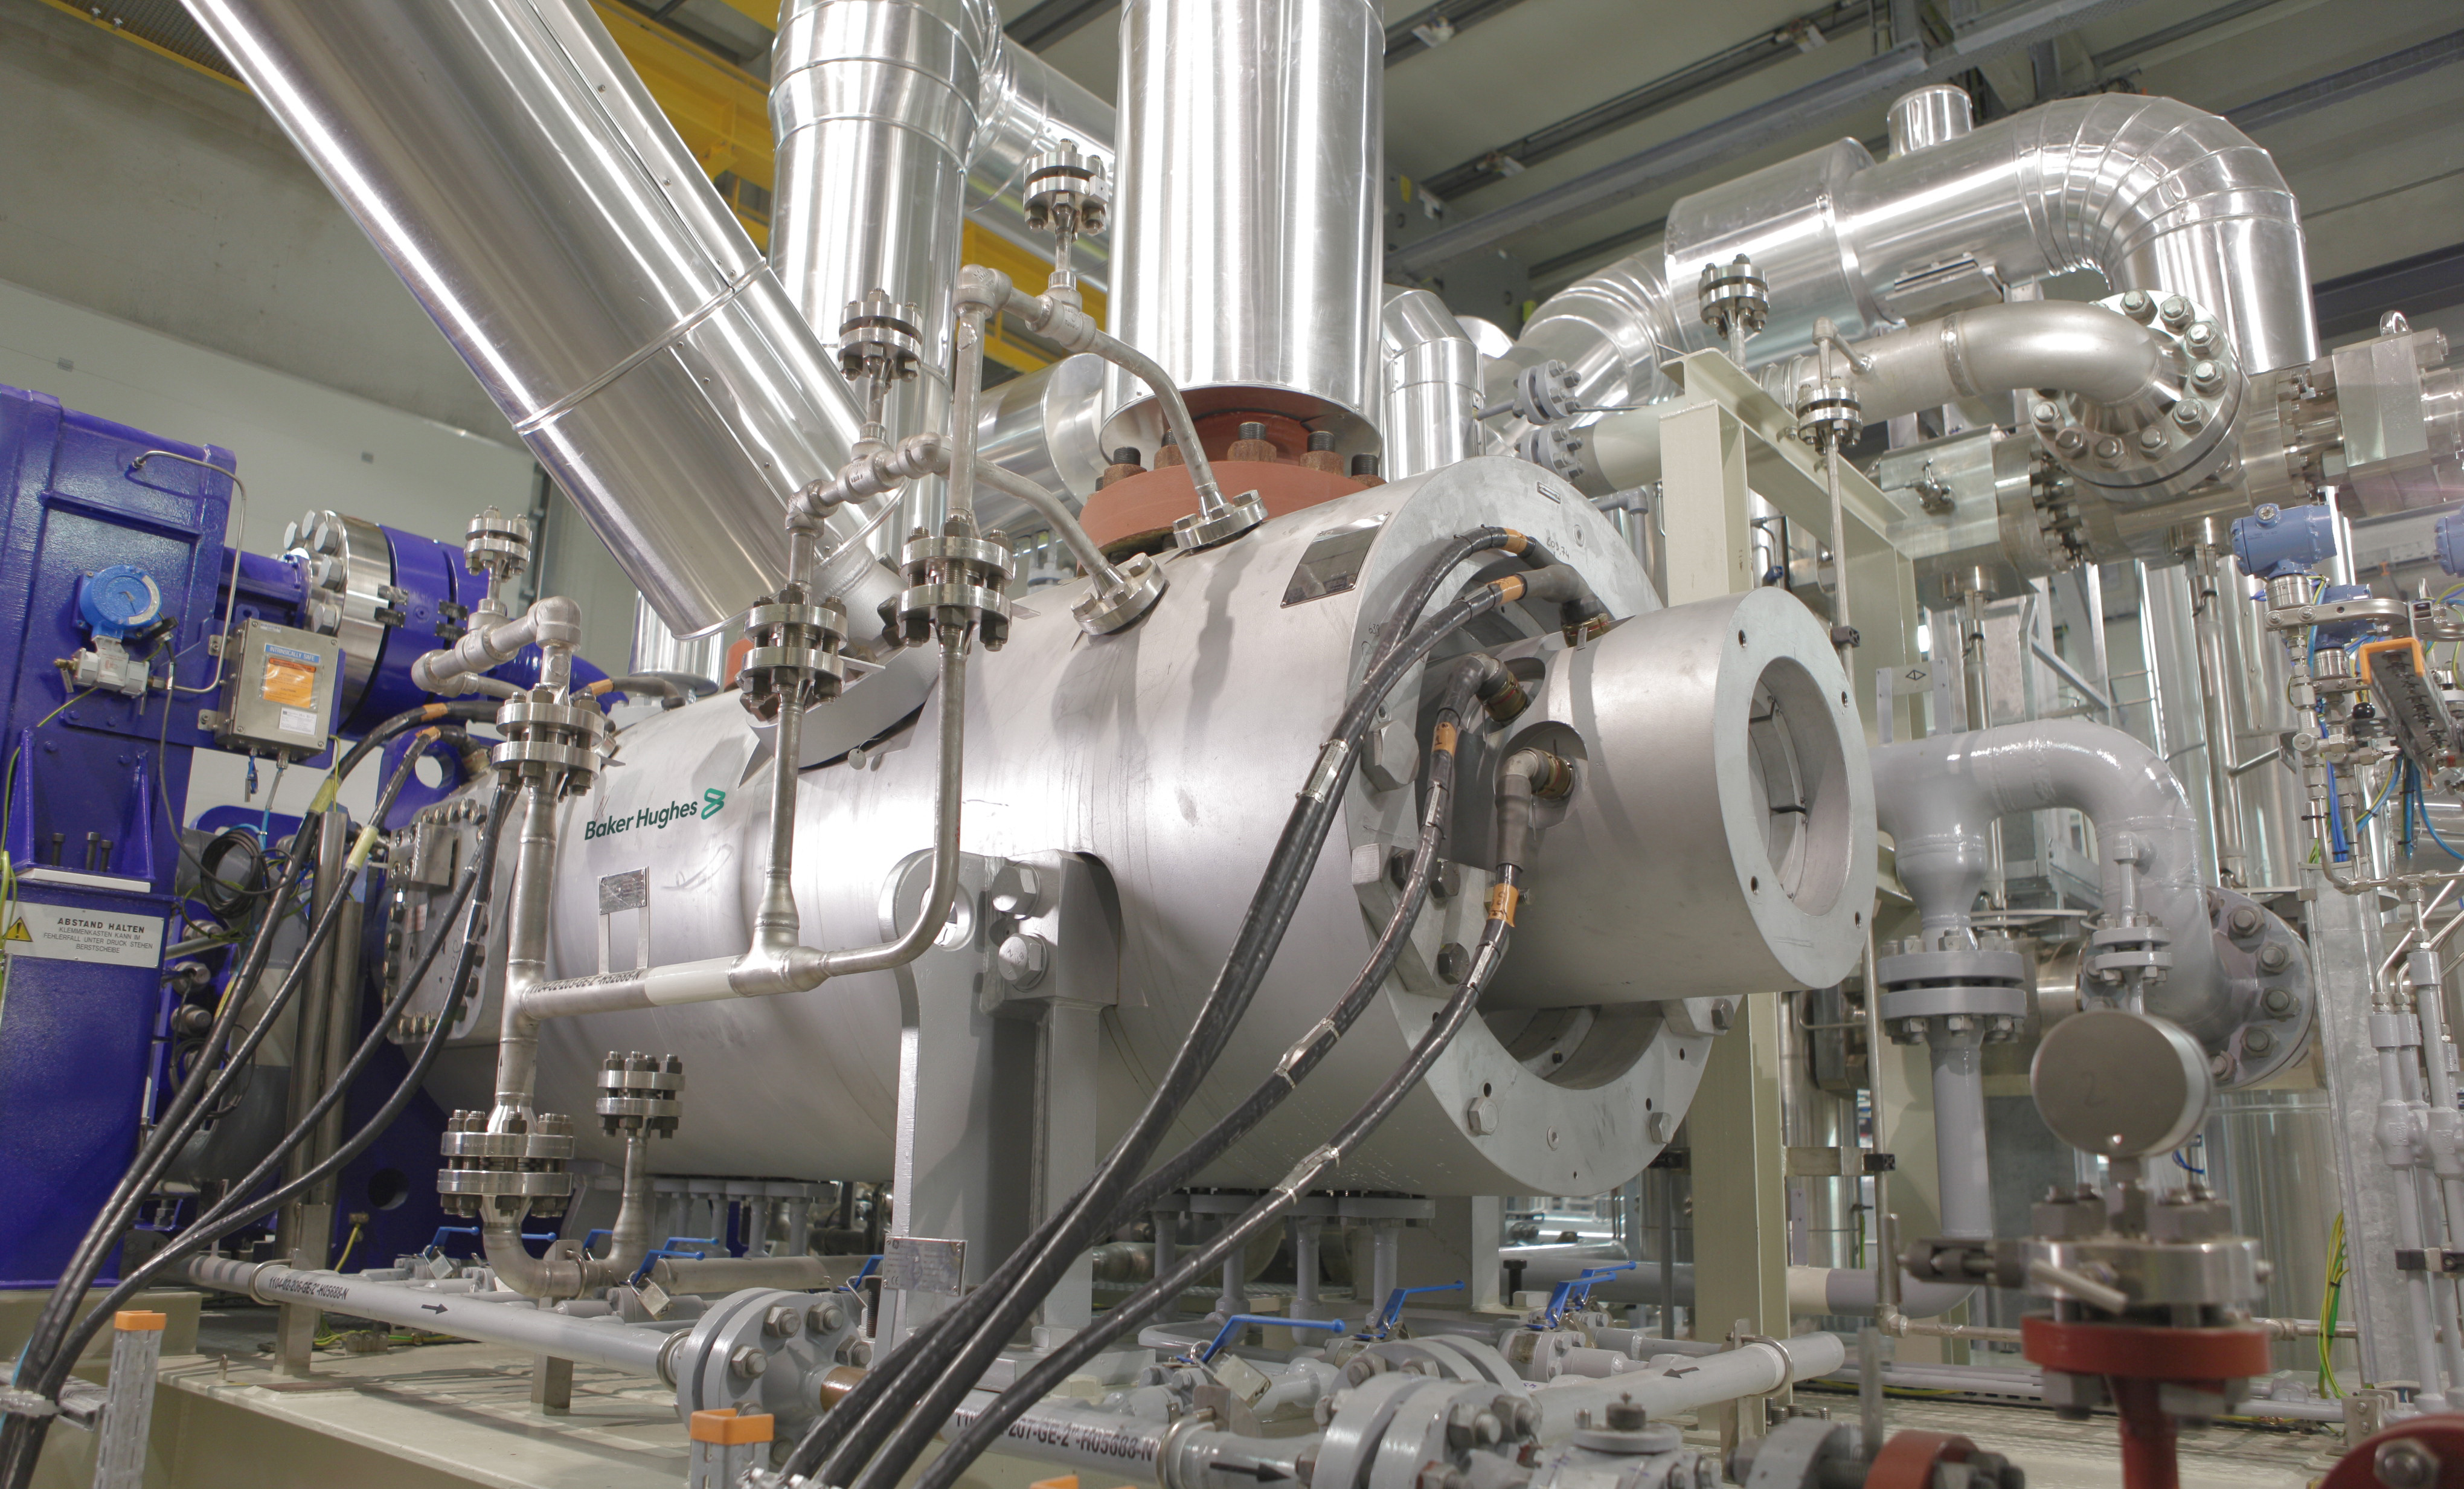 An Integrated Compressor Line or ICL, an important part of decarbonization 